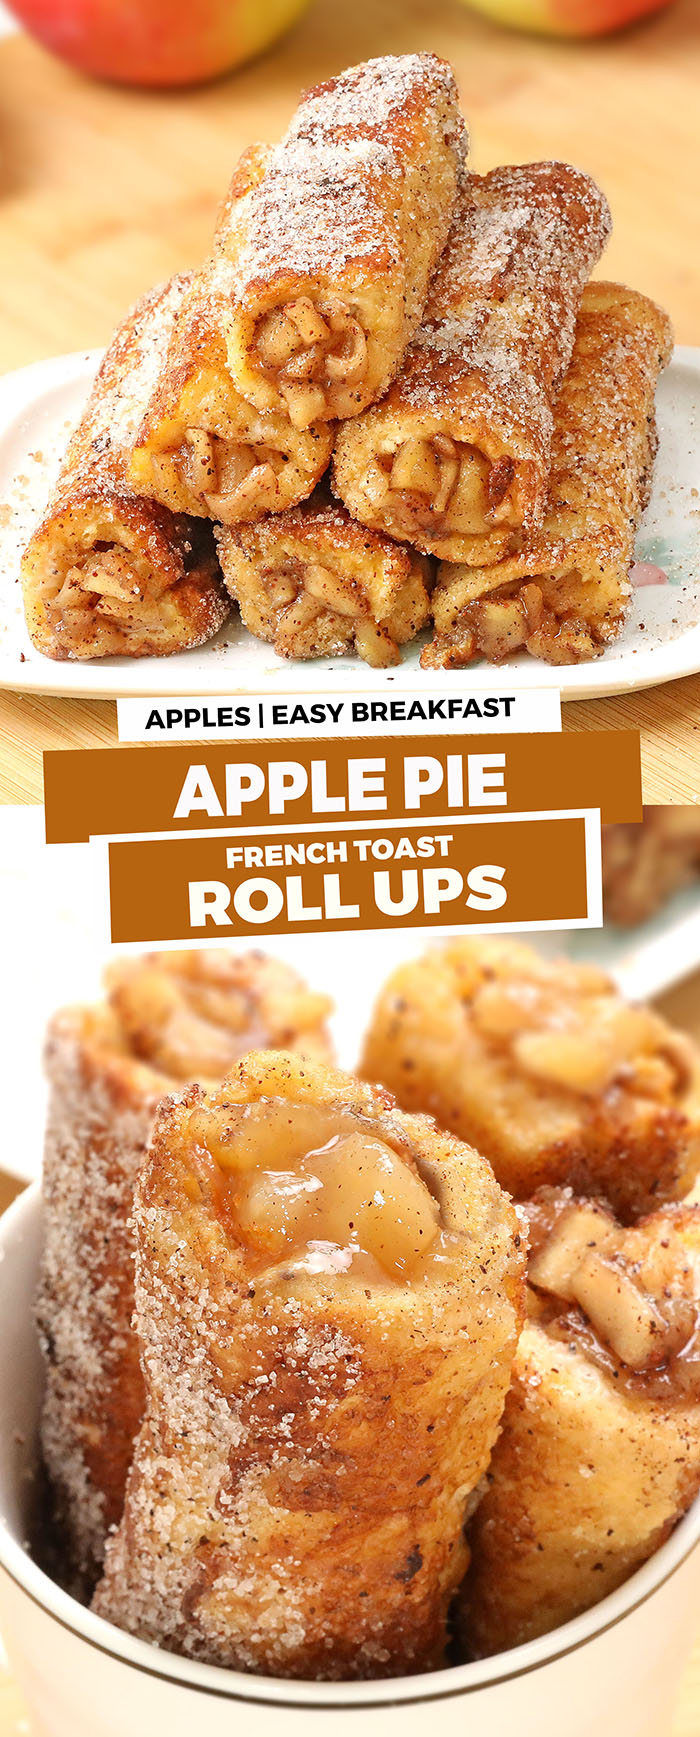 Apple Pie French Toast Roll Ups - Perfect grab-and-go breakfast or snack. Tasty apple pie filling rolled inside the slice of bread, fried until golden brown and coated with cinnamon-sugar 